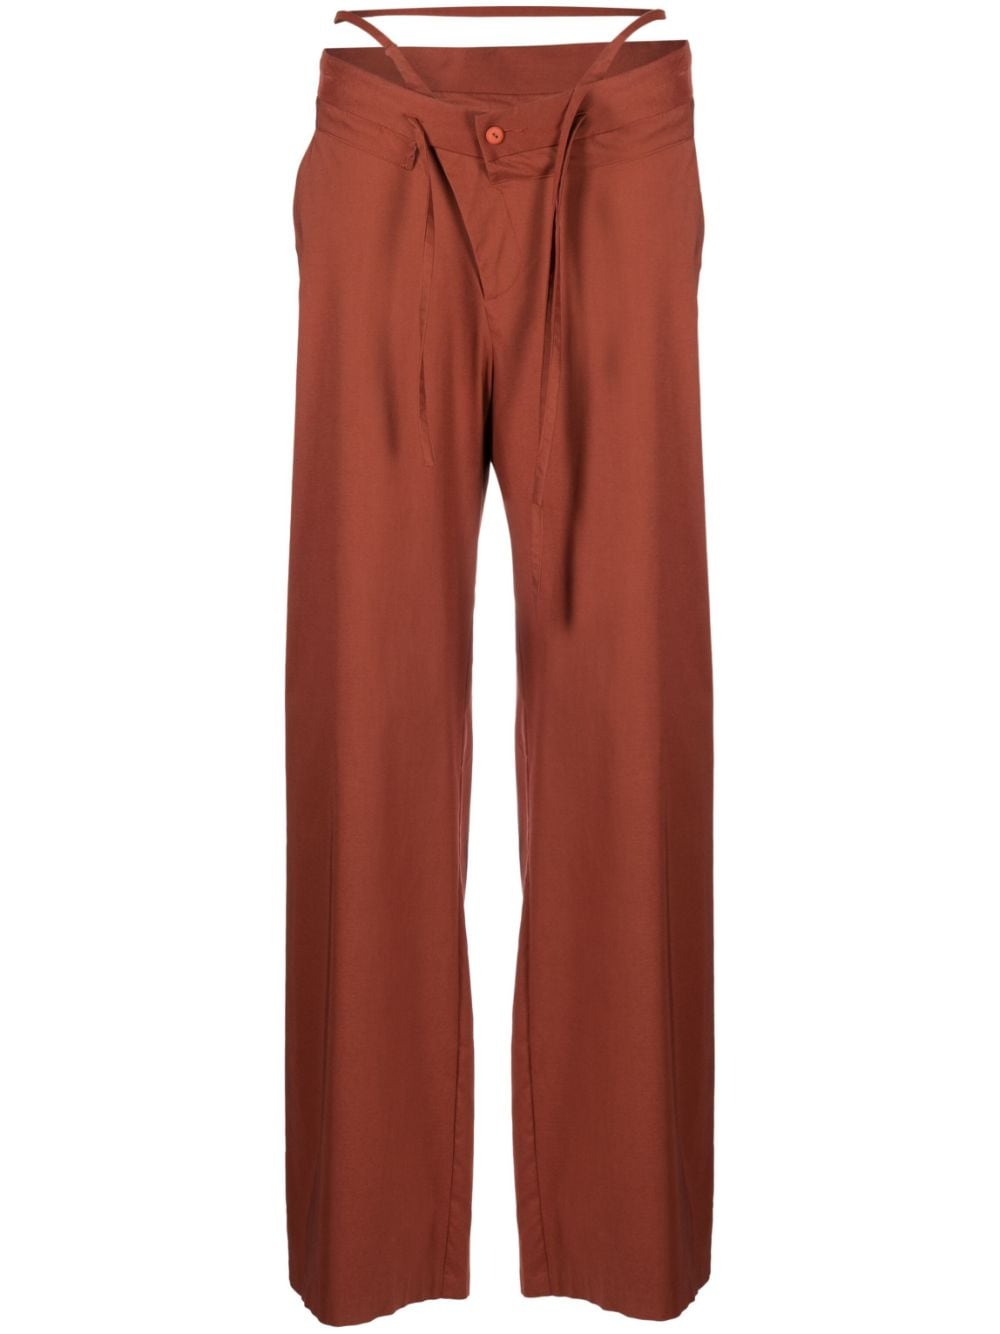 OTTOLINGER DOUBLE-FOLD TAILORED TROUSERS